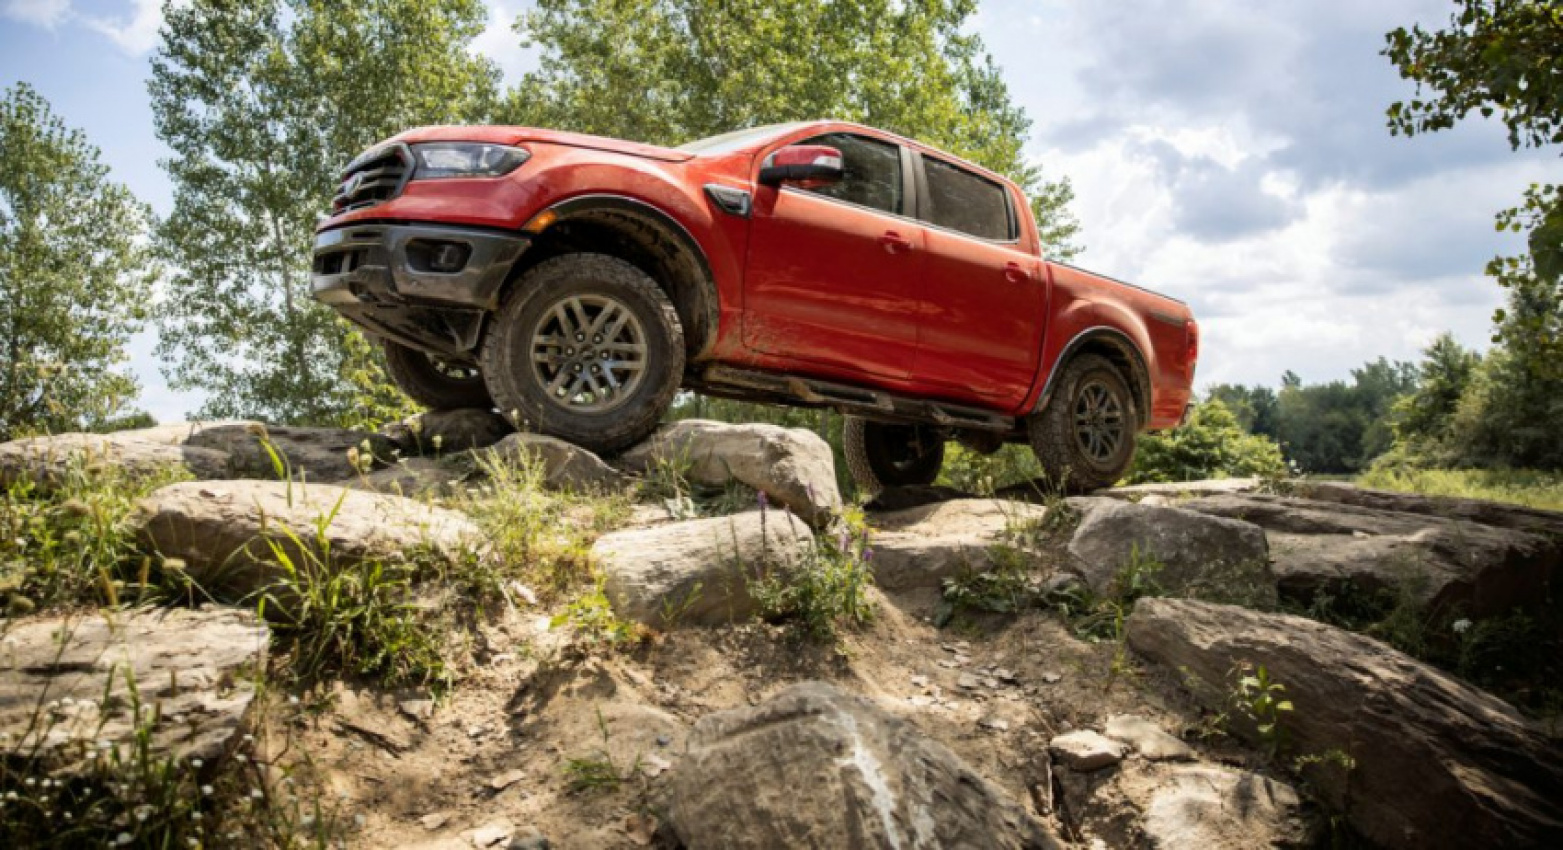 autos, cars, ford, ford ranger, midsize, ranger, truck, 6 favorite features of the 2022 ford ranger